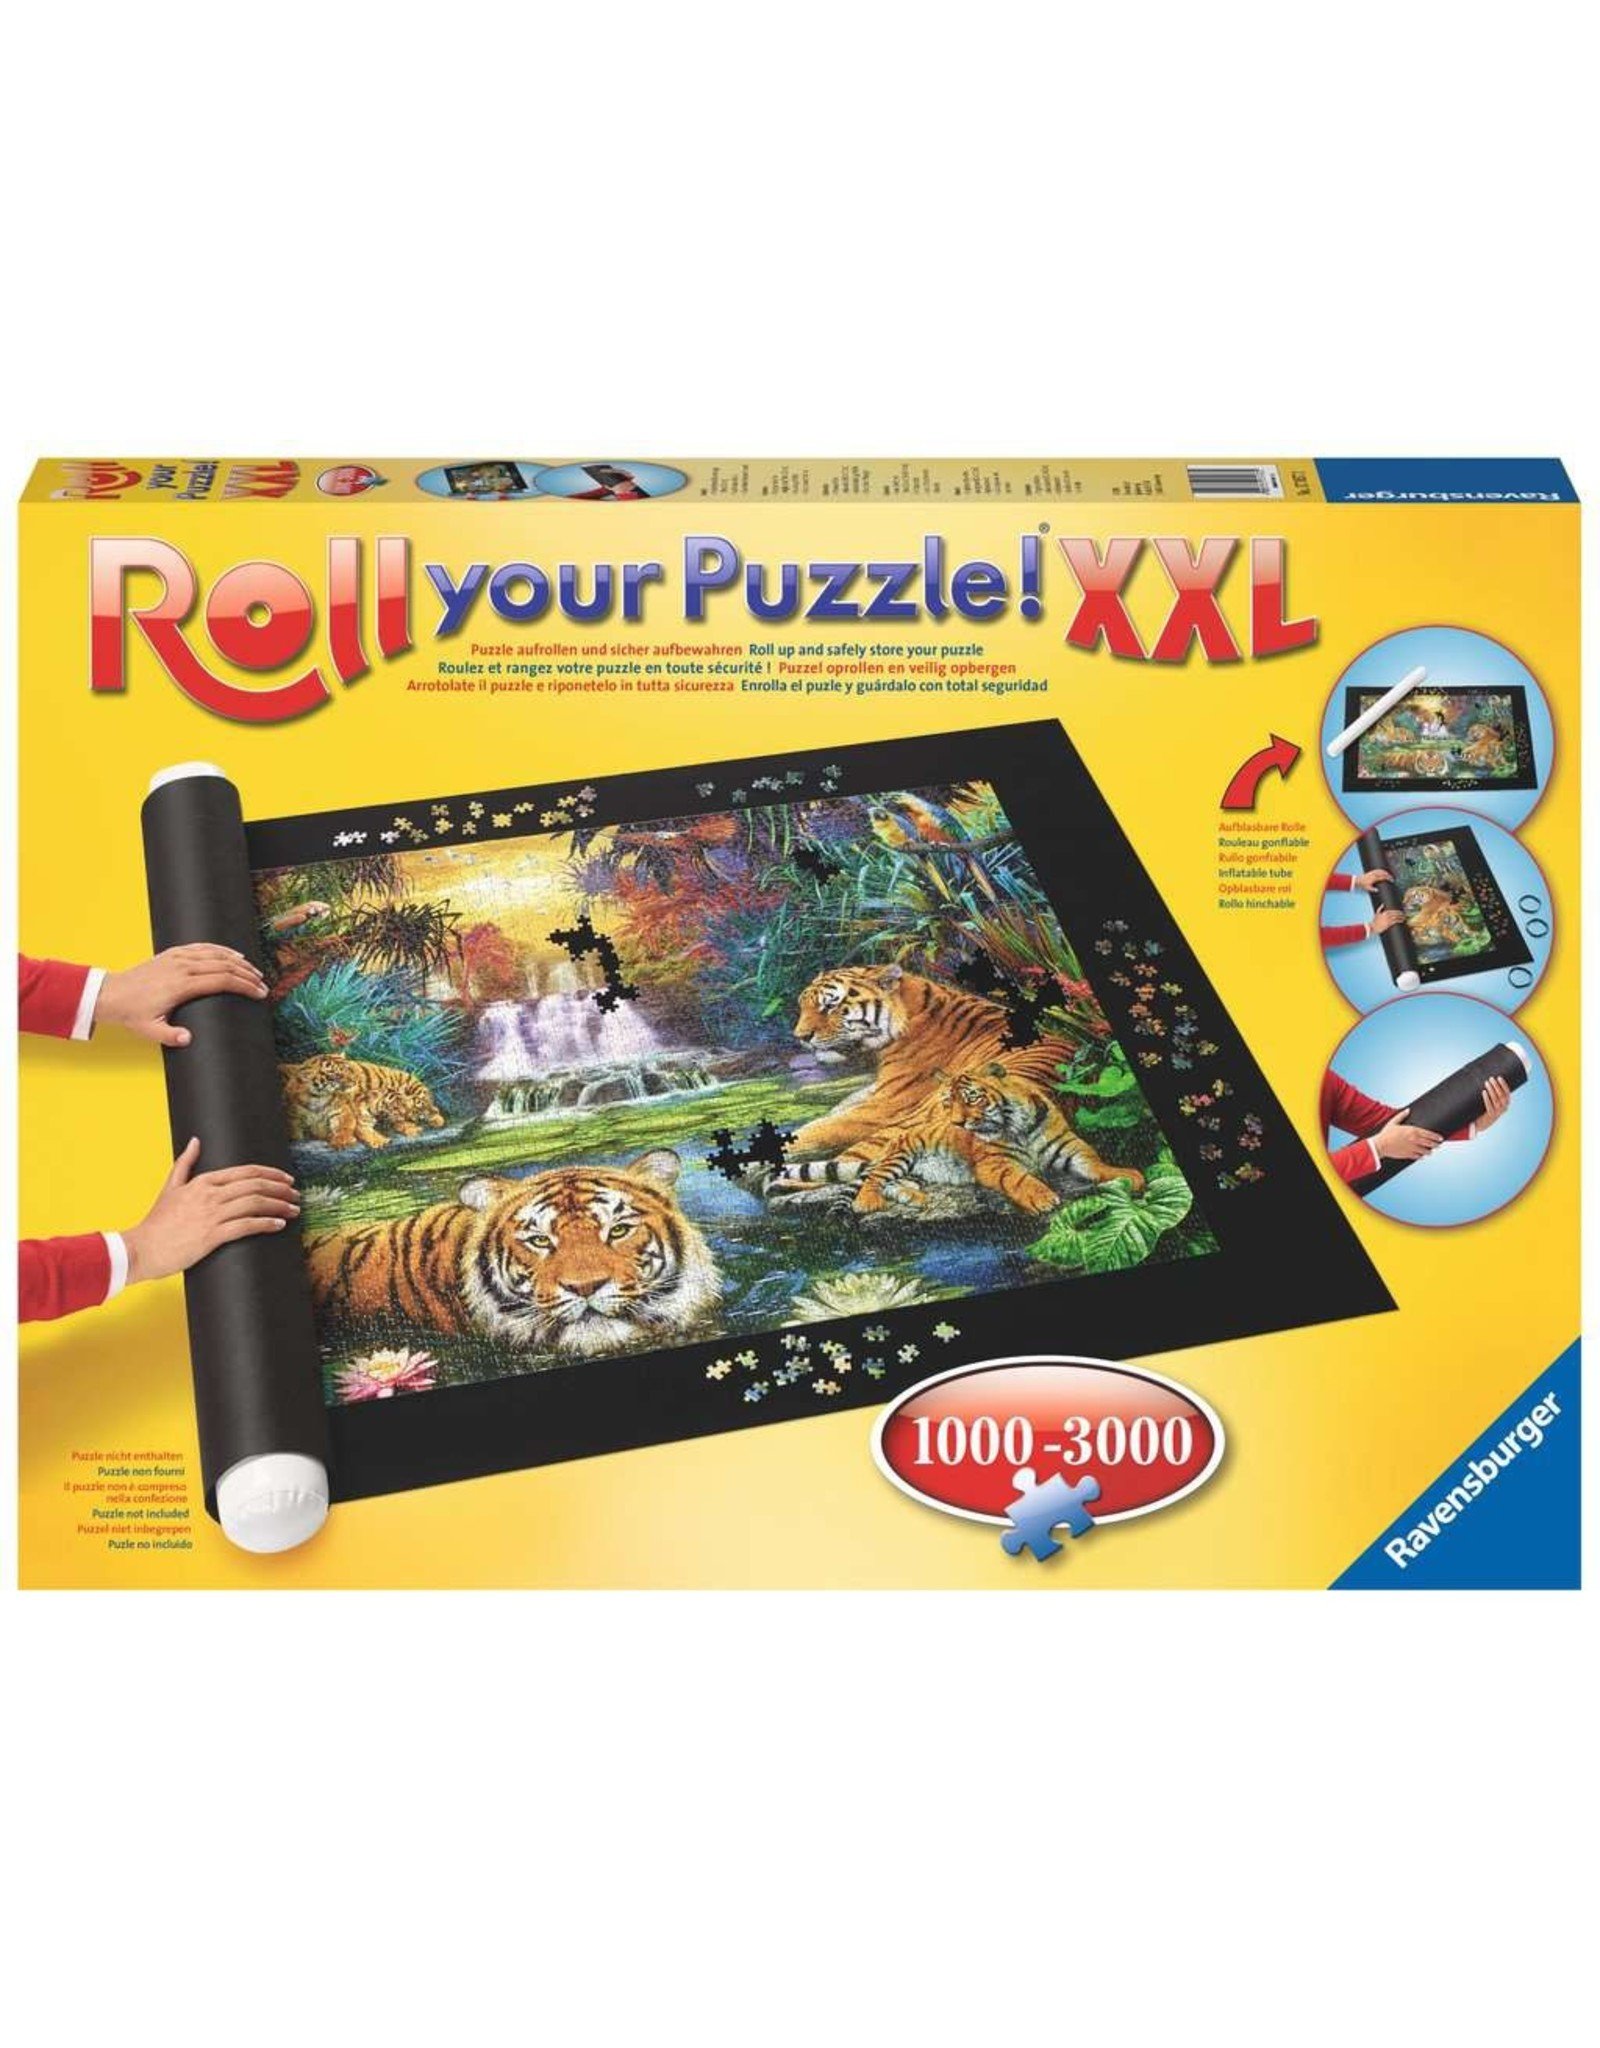 Ravensburger Roll your puzzle! XXL 1000-3000